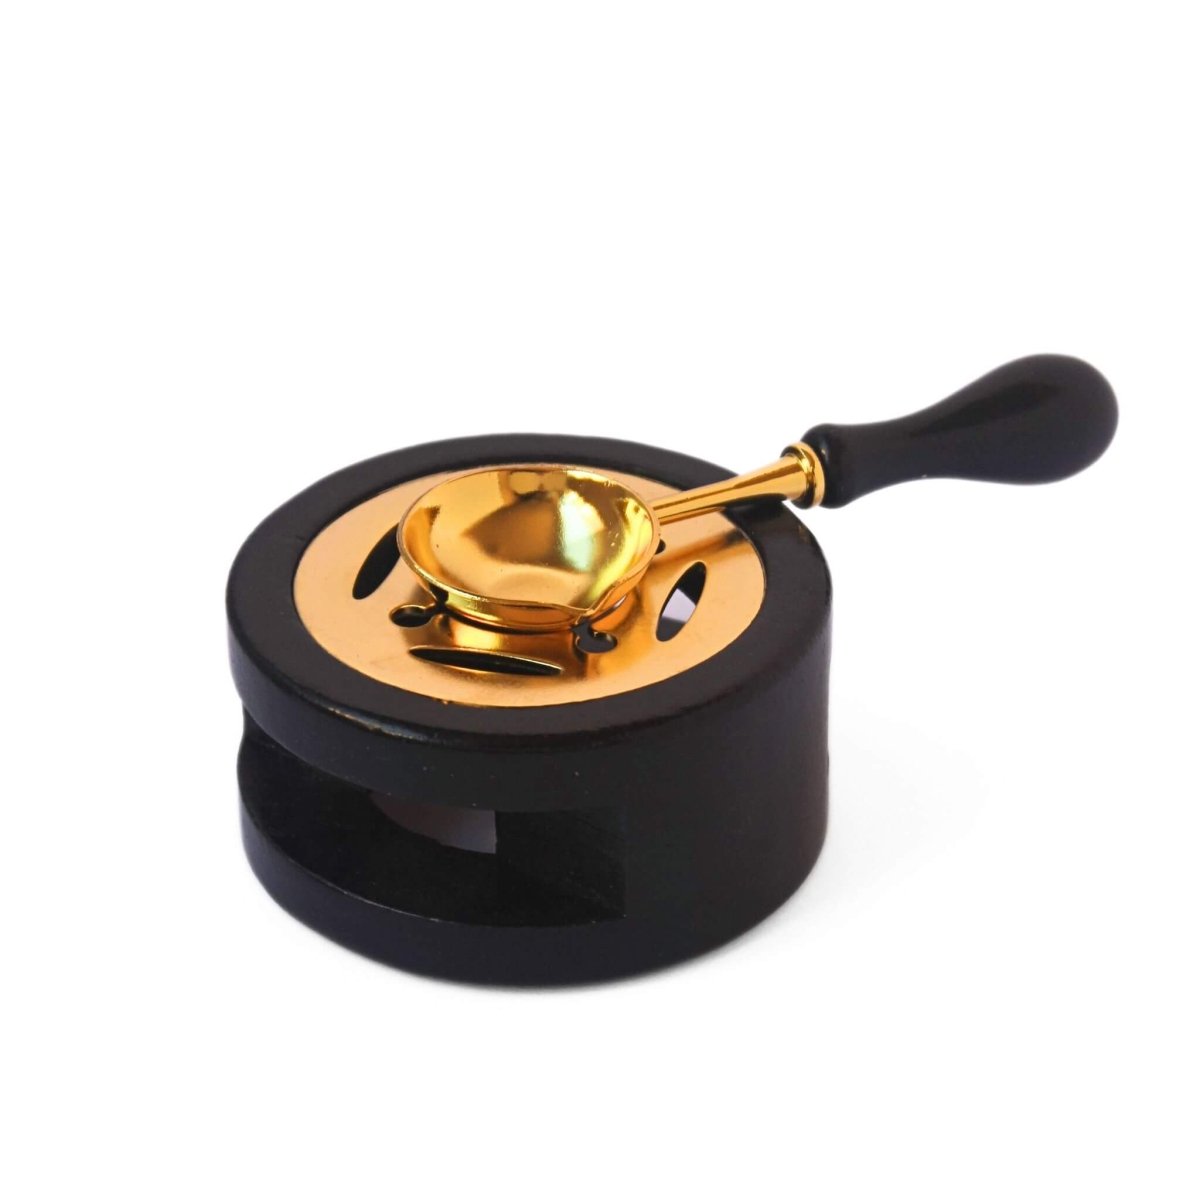 black and gold wax melting stove and spoon